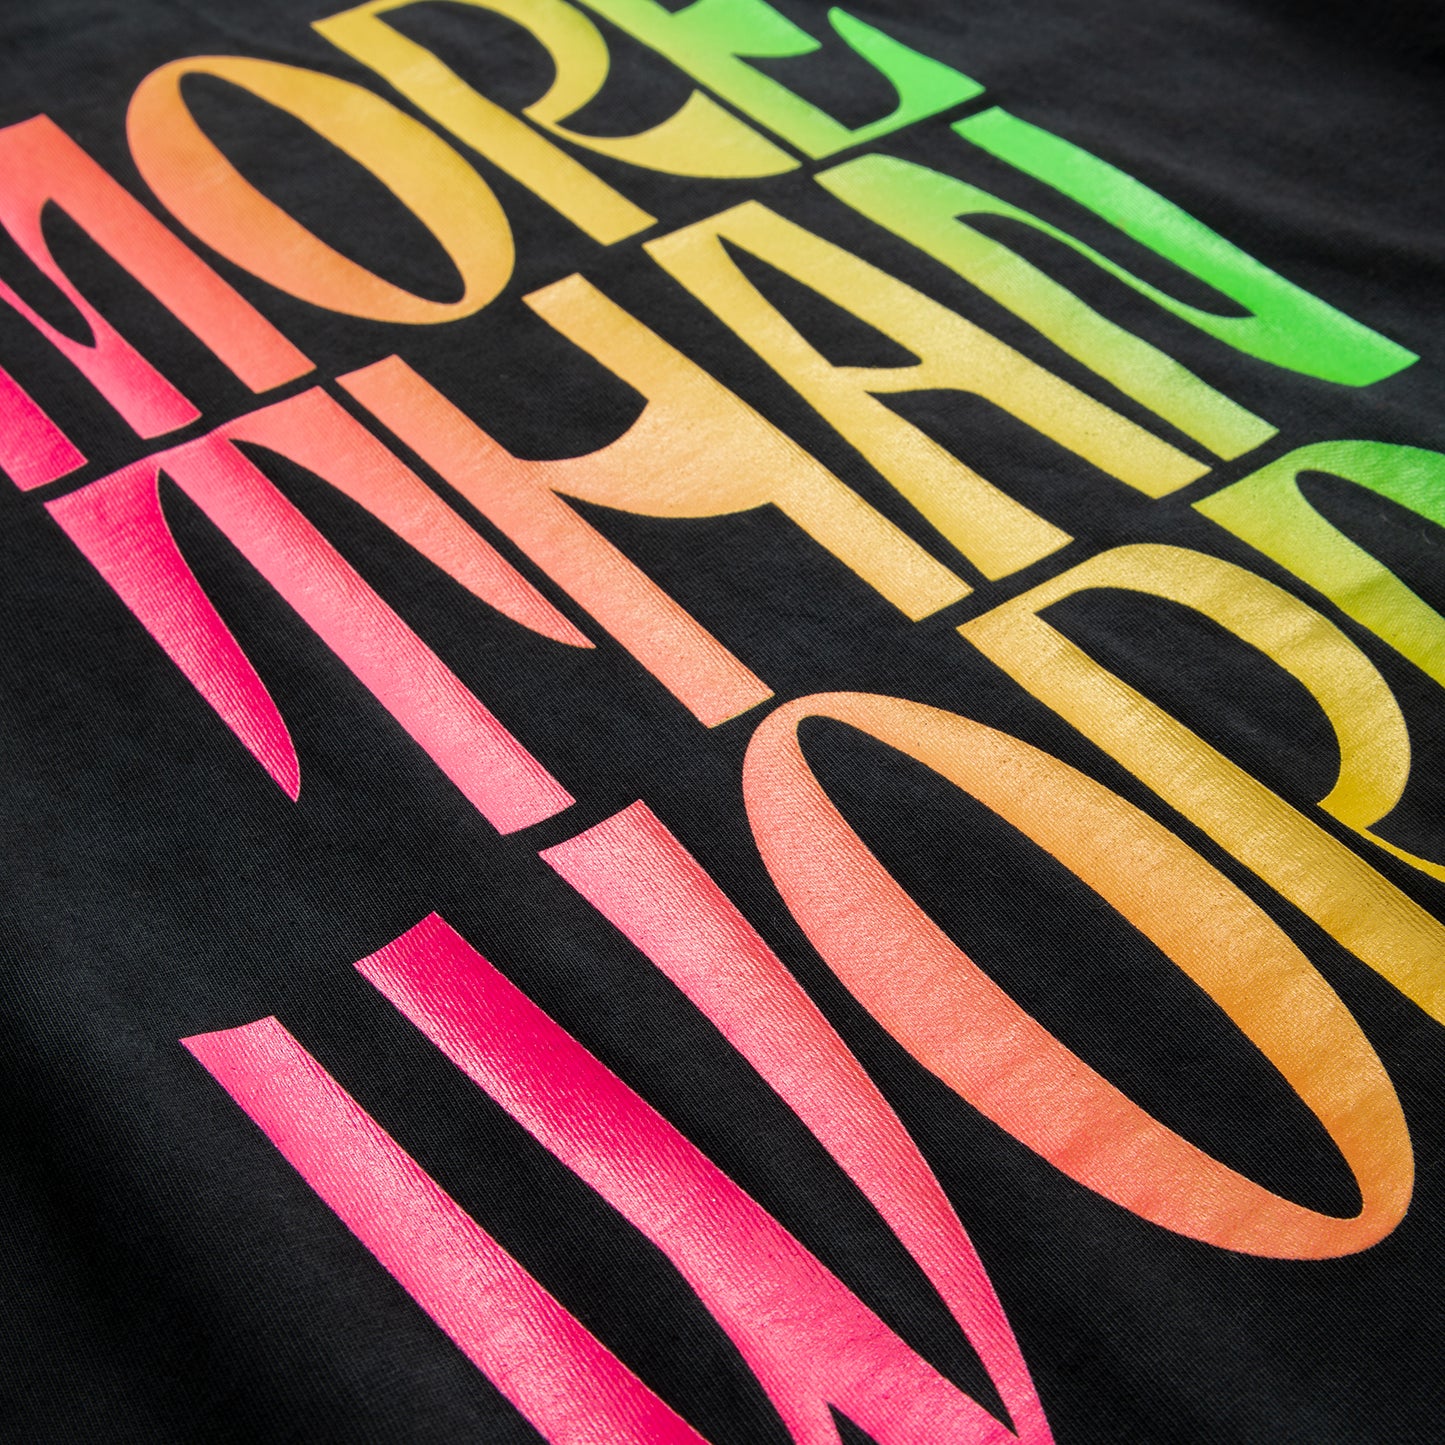 Bossi More Than Words Tee (Black)